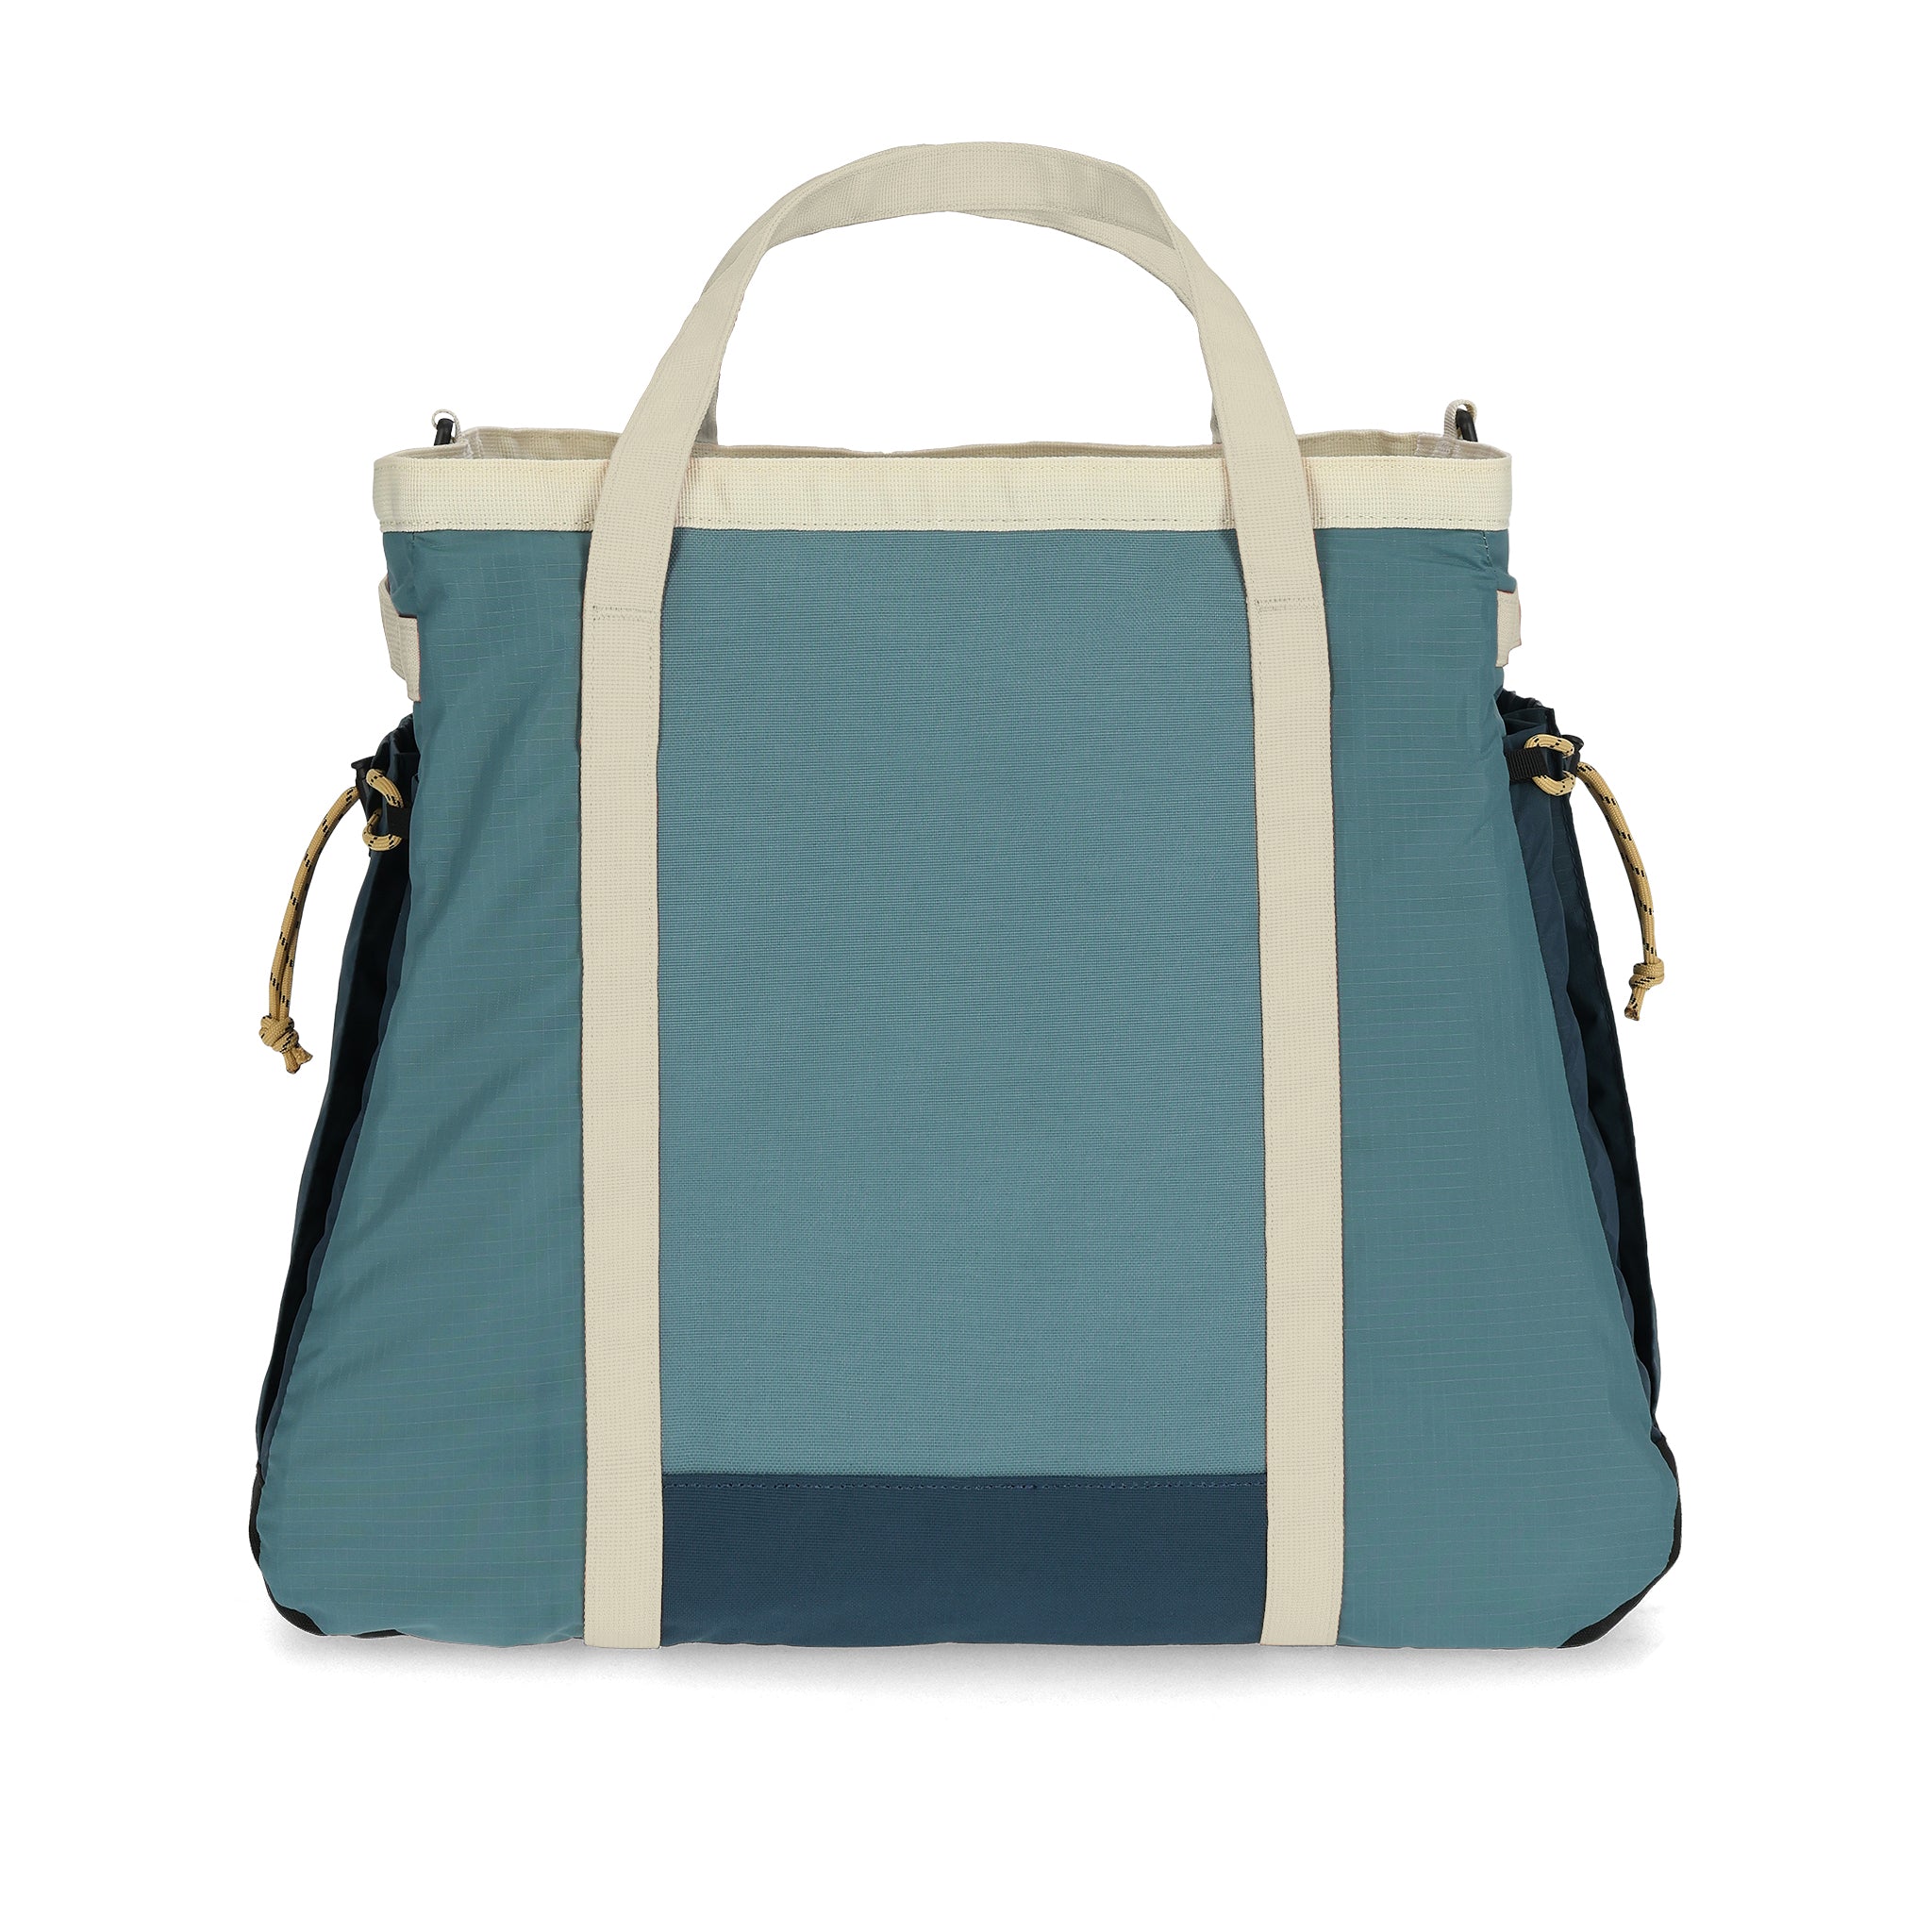 Back View of Topo Designs Mountain Pack 28L in "Geode Green / Sea Pine"